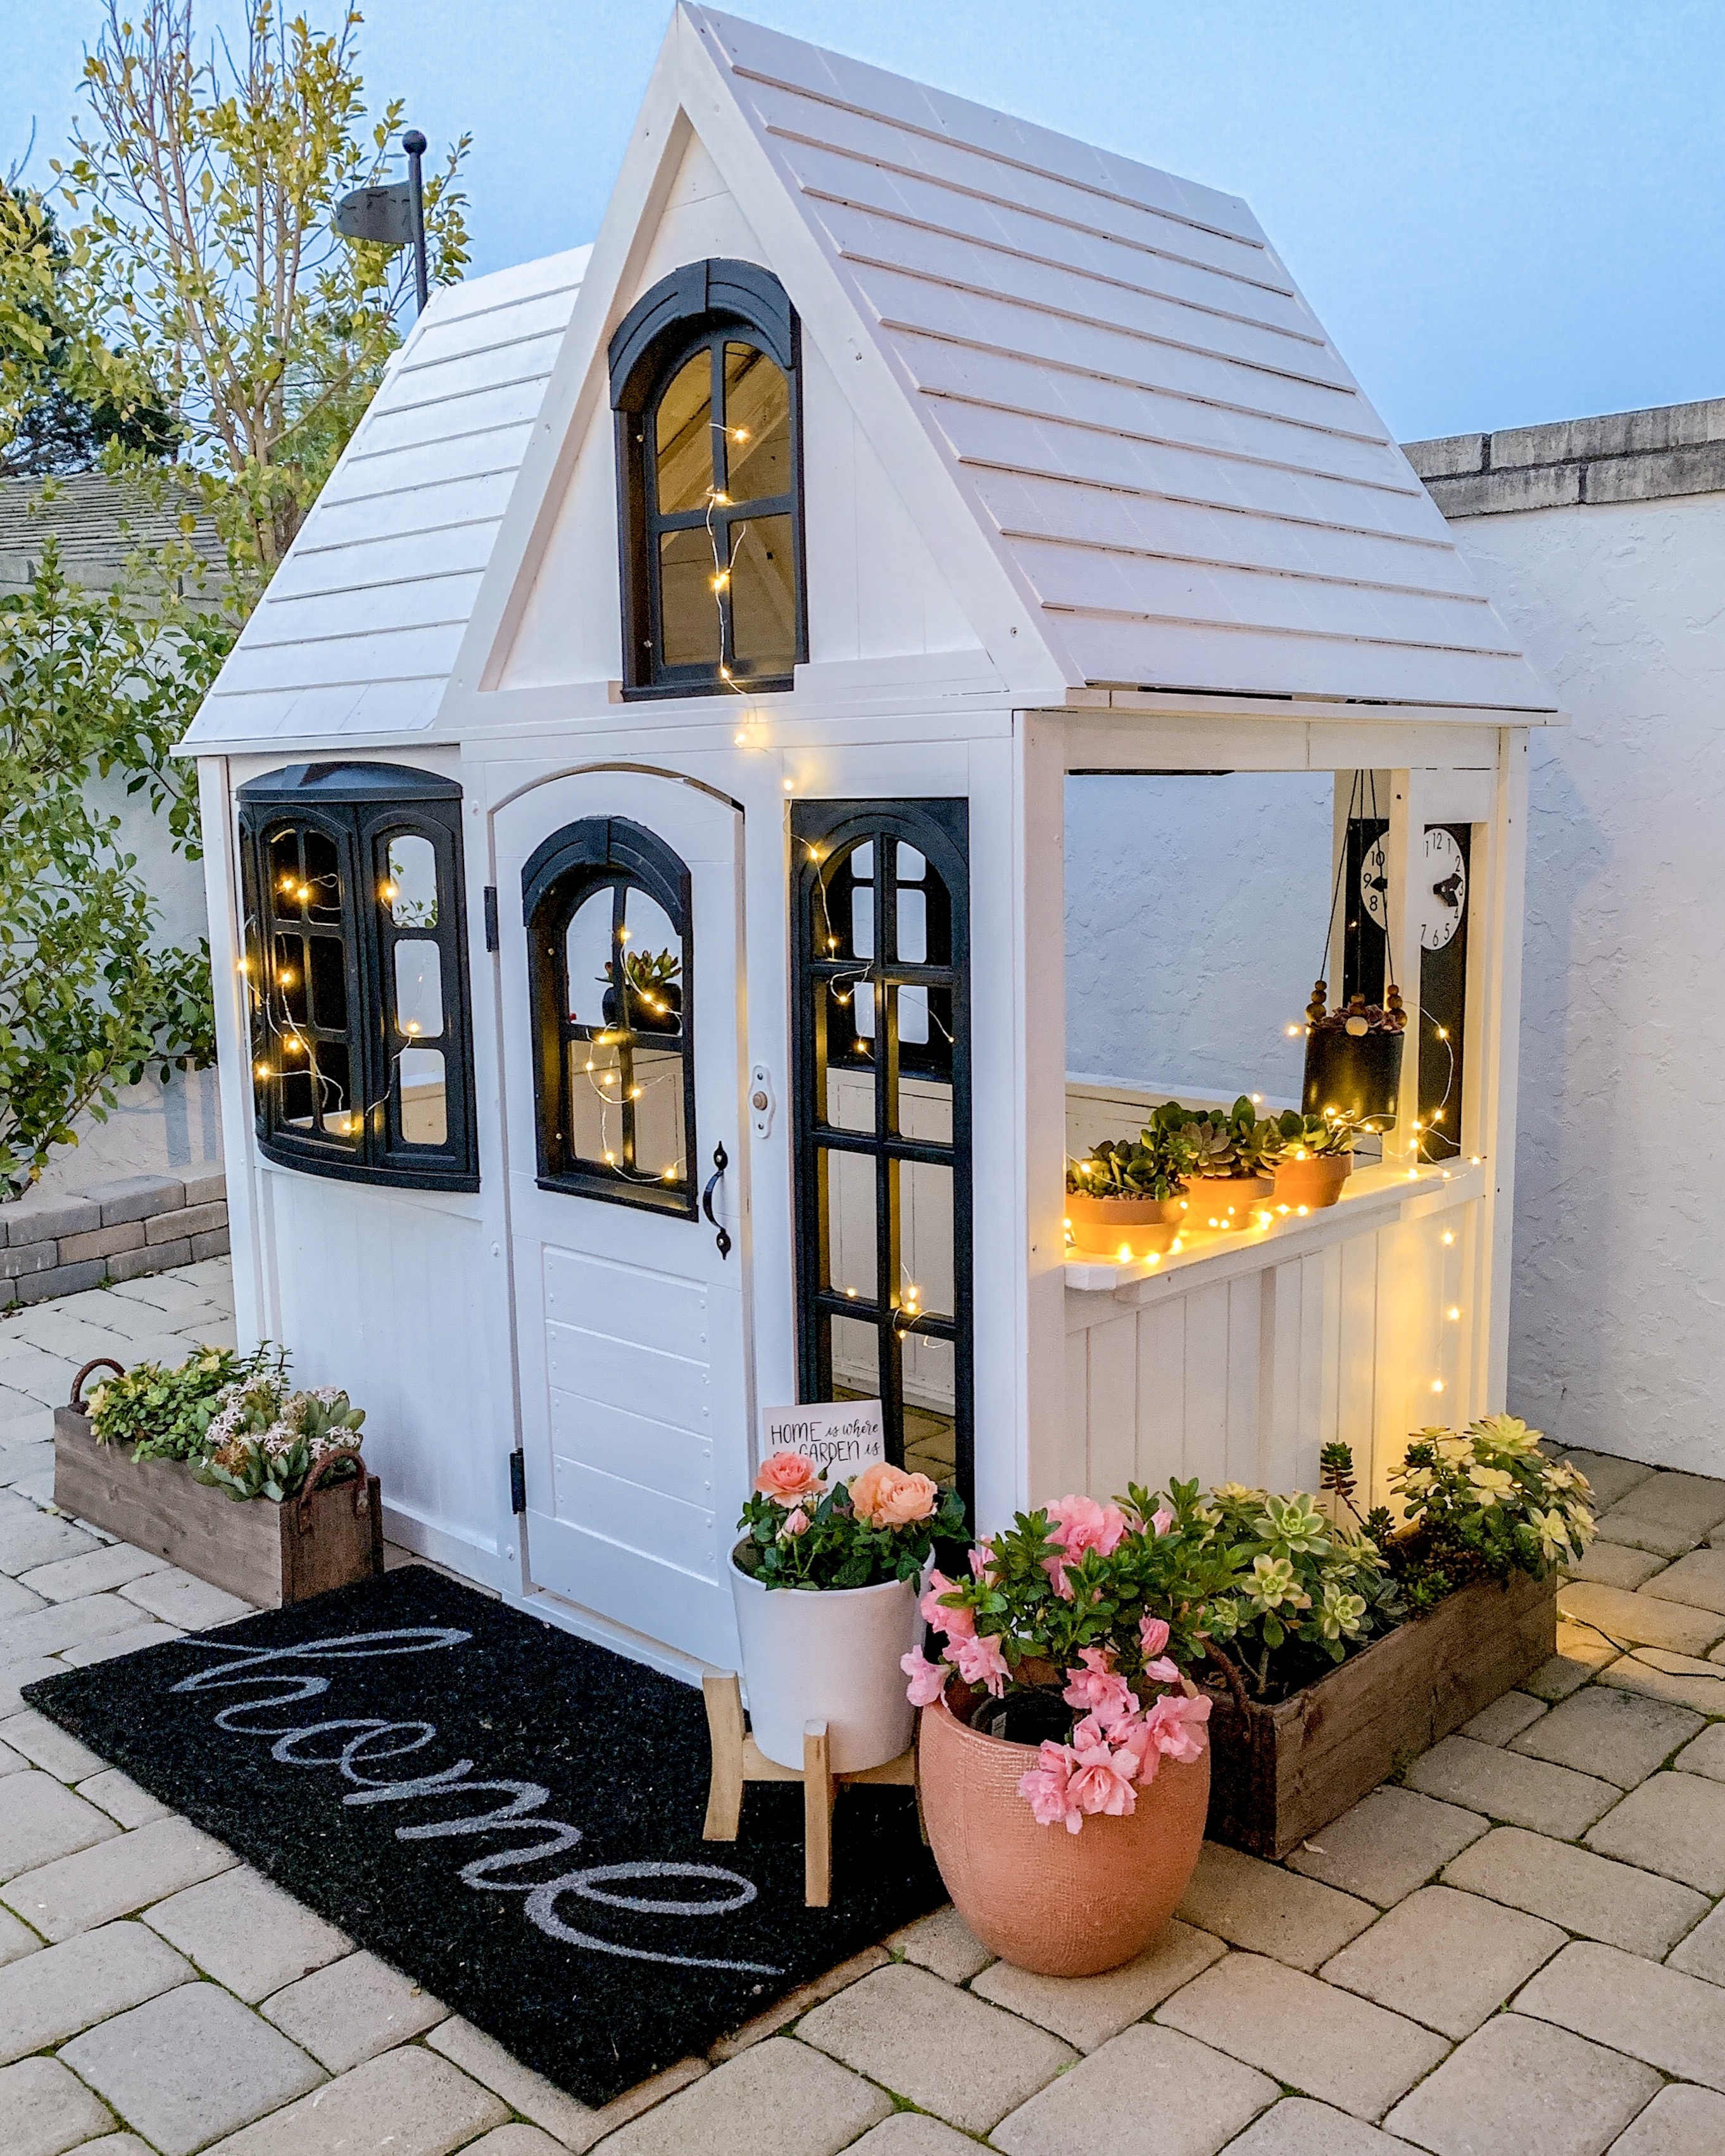 How to Create a Magical Spring Playhouse